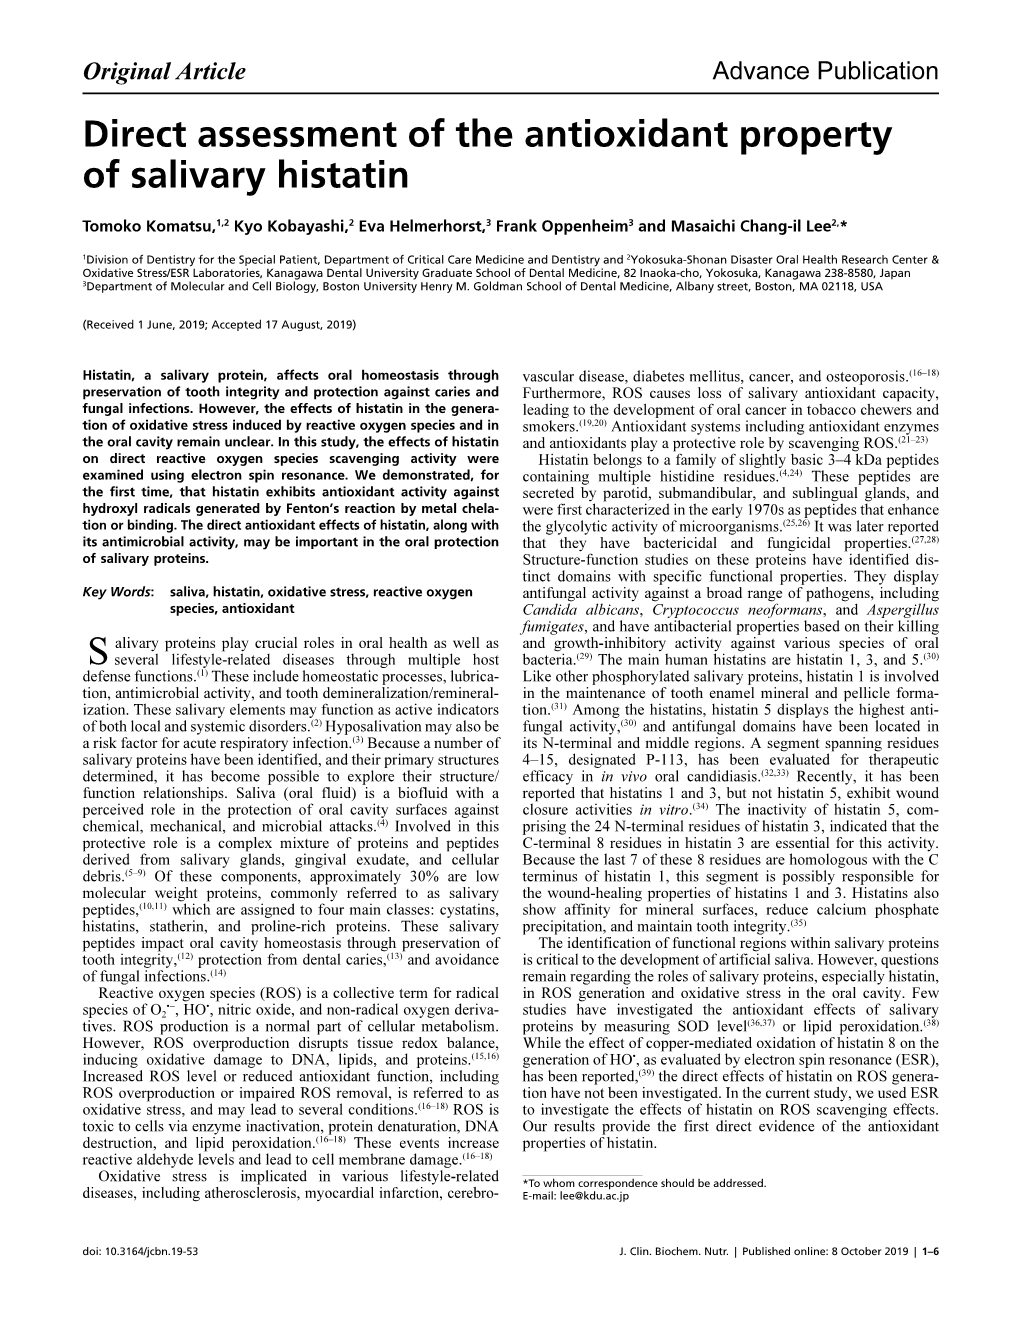 Direct Assessment of the Antioxidant Property of Salivary Histatin